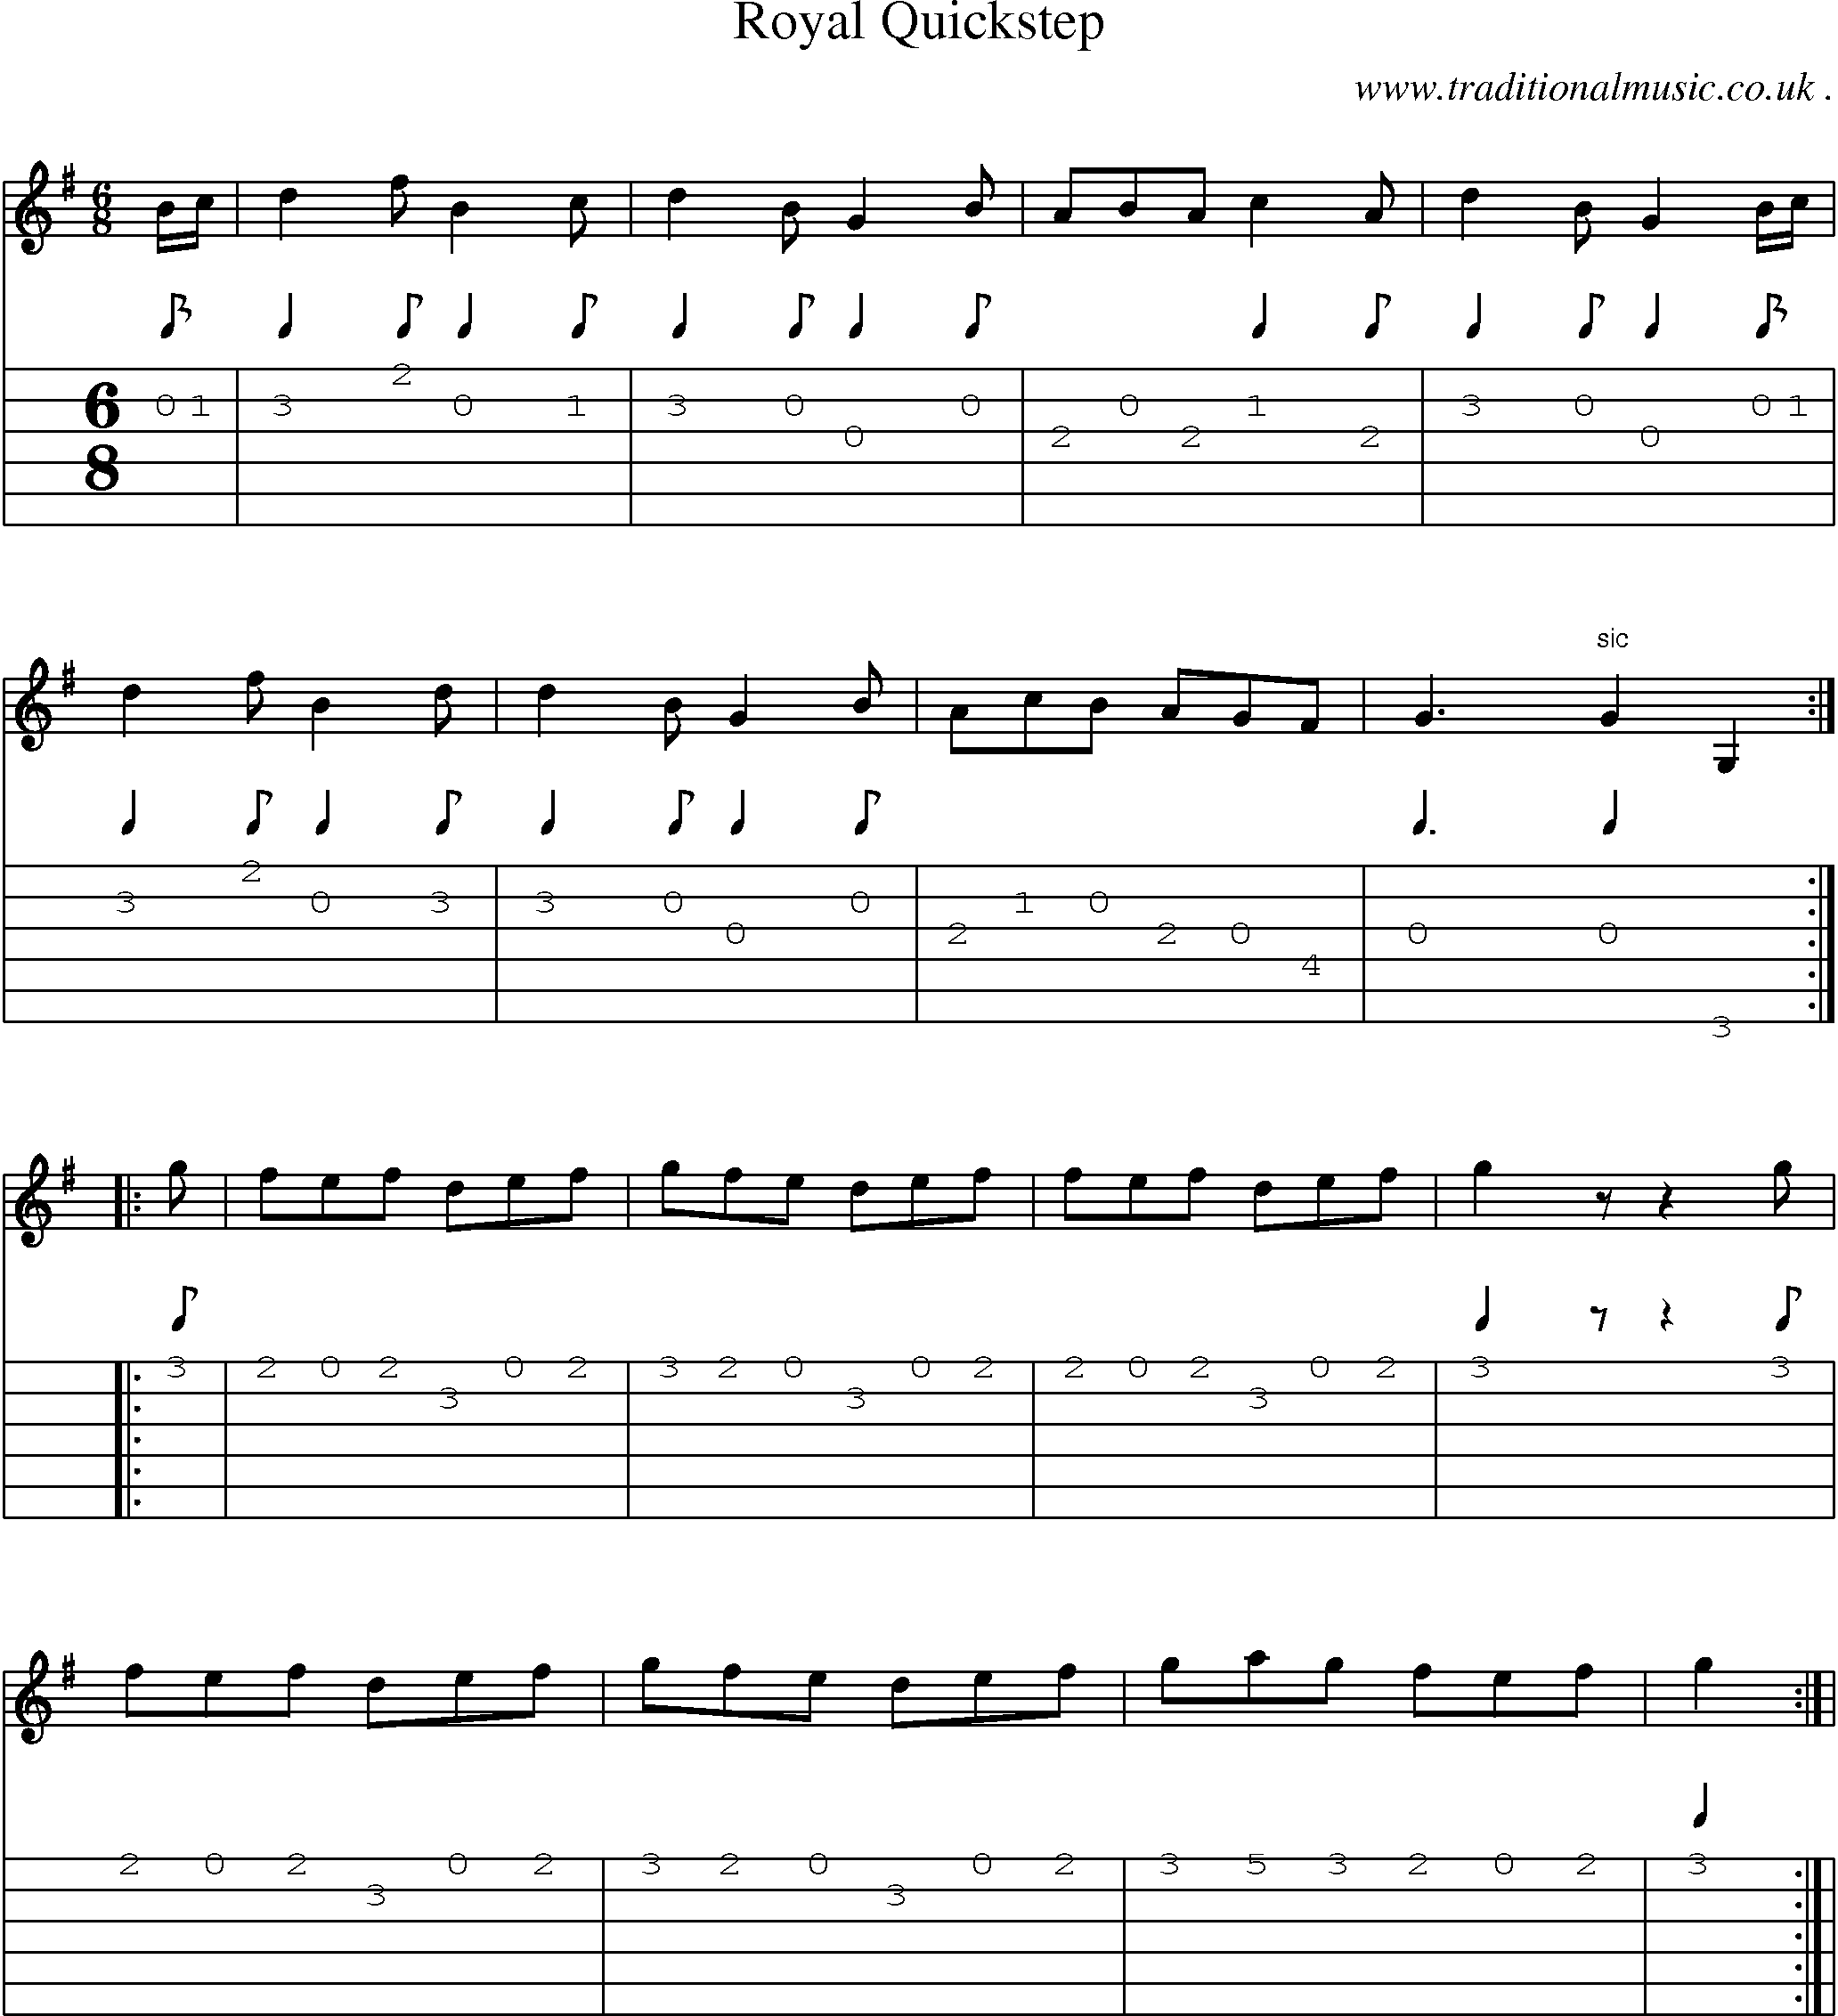 Sheet-Music and Guitar Tabs for Royal Quickstep